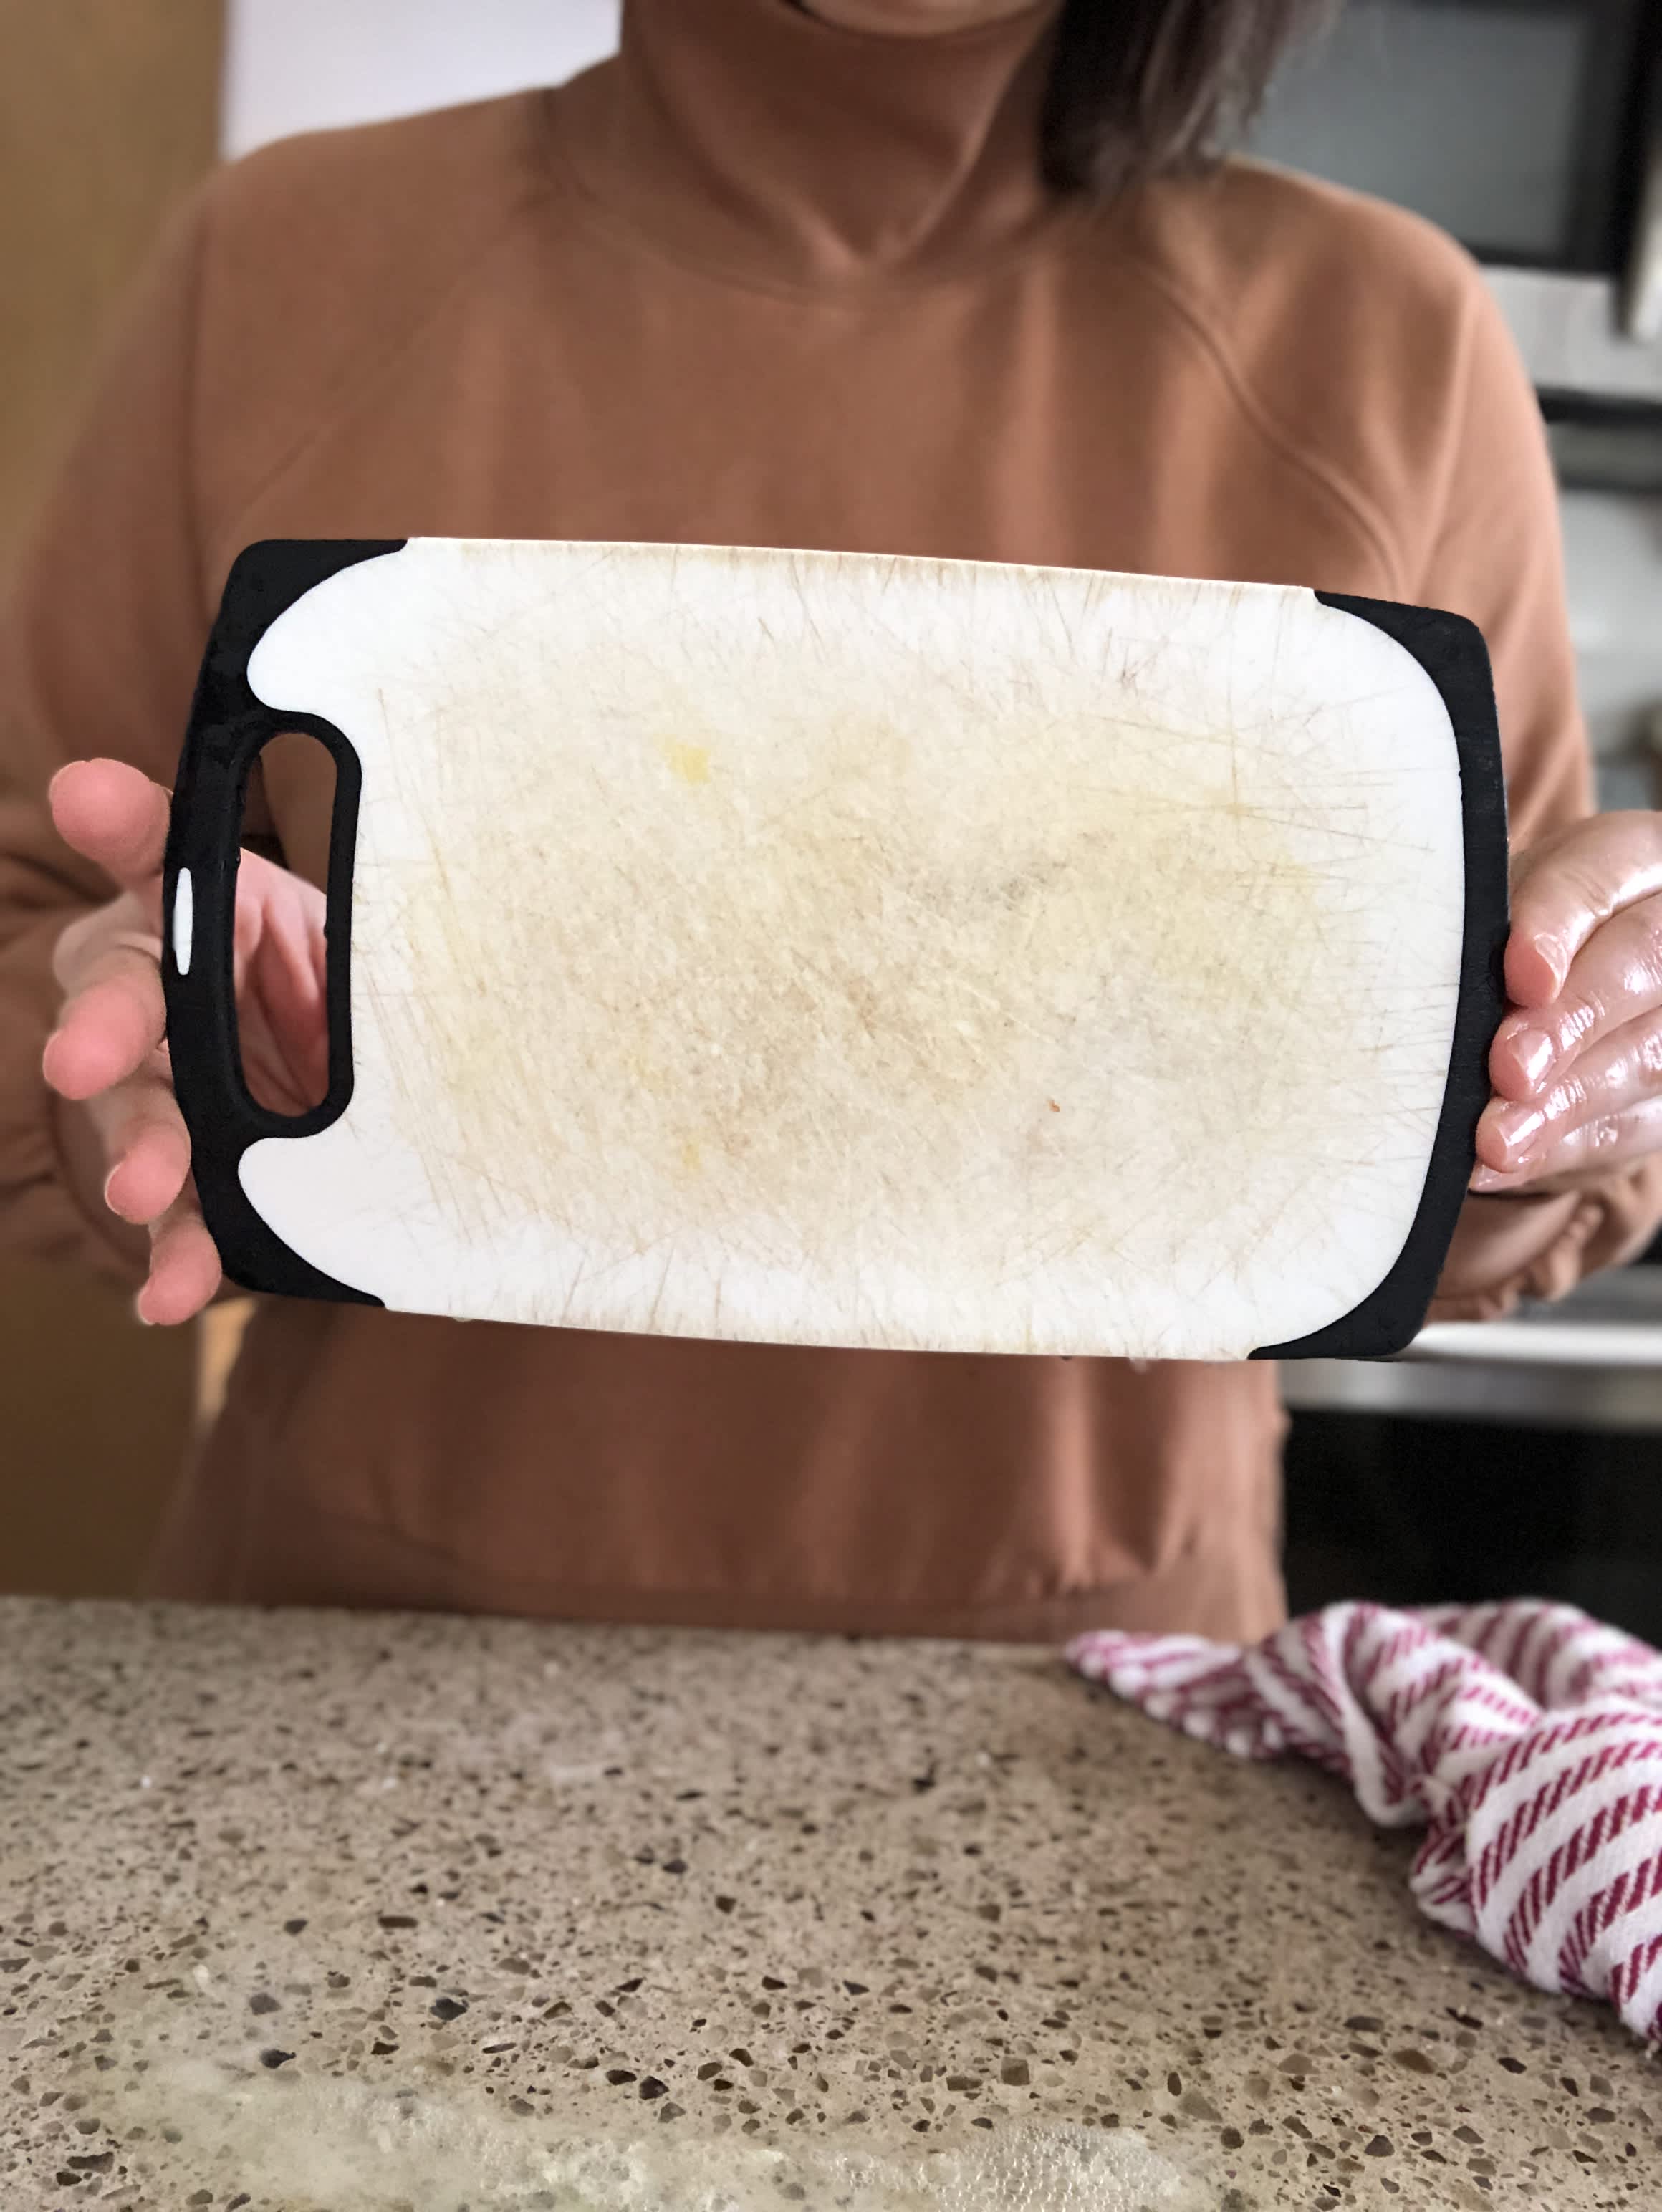 This Cutting Board Hack Makes Cleaning Up So Easy - Between Carpools